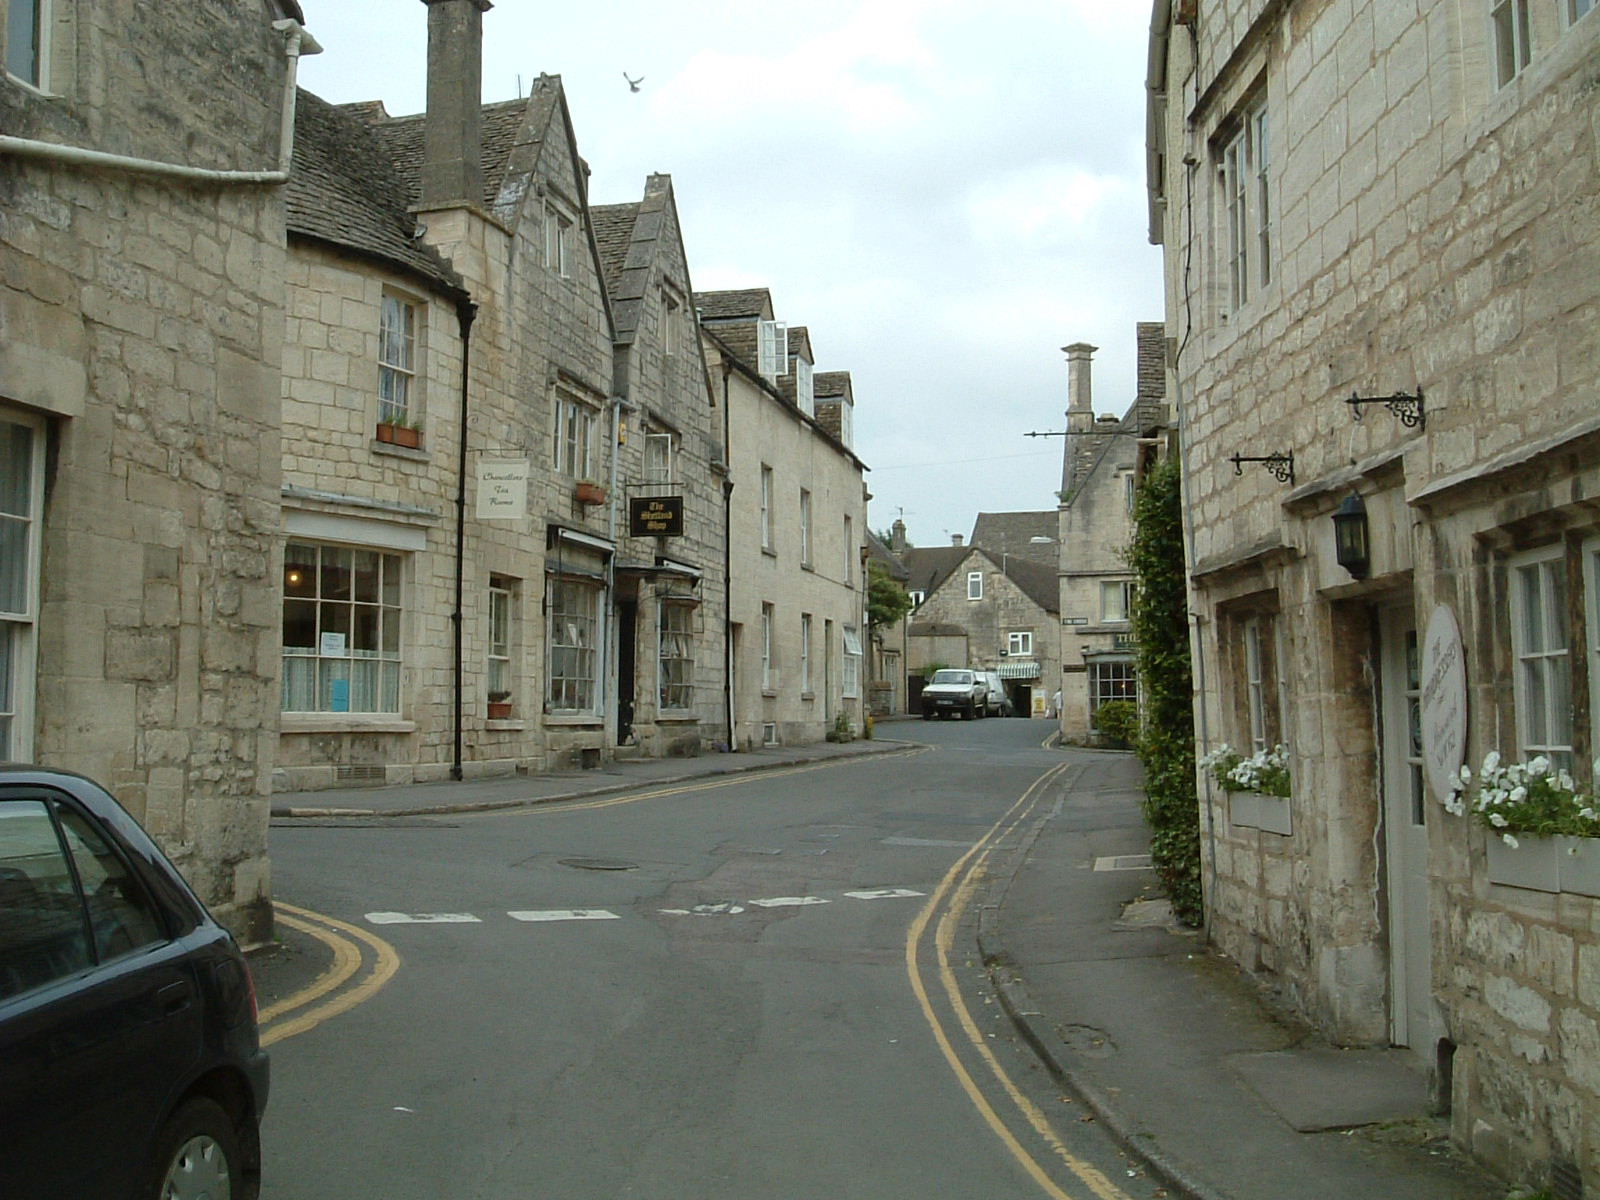 Painswick town centre